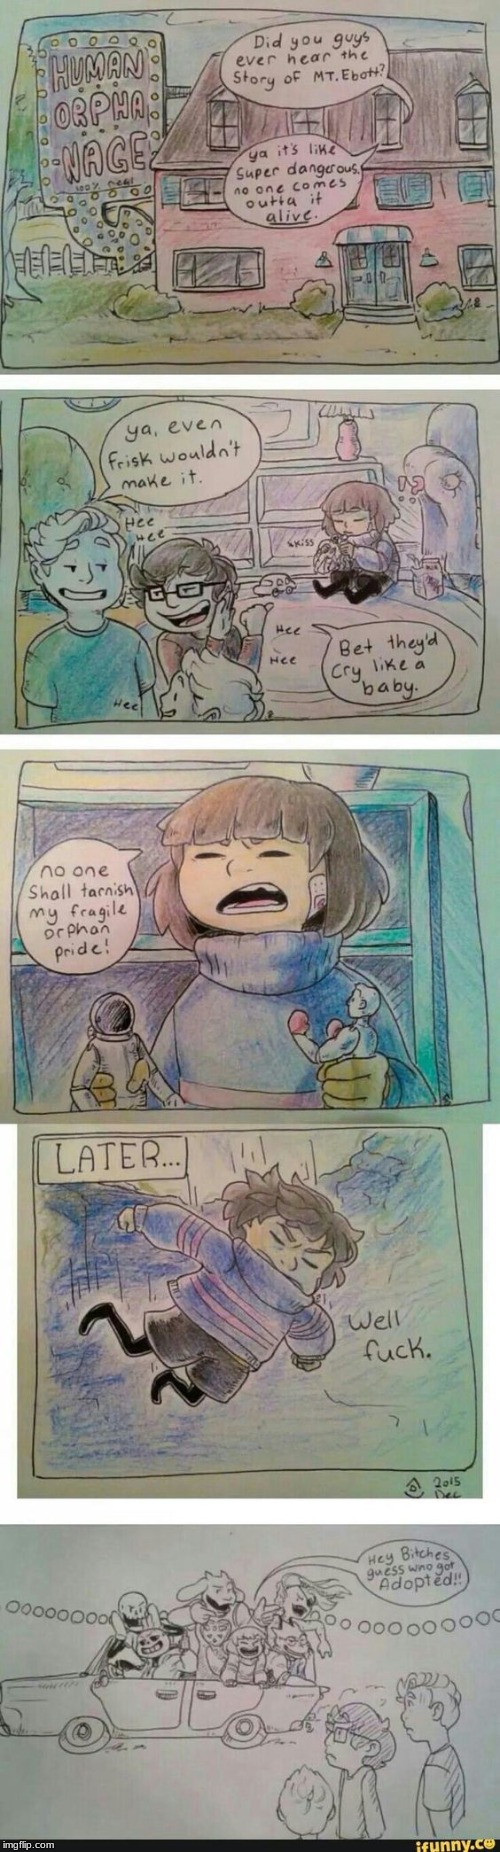 The real frisk story | image tagged in undertale | made w/ Imgflip meme maker